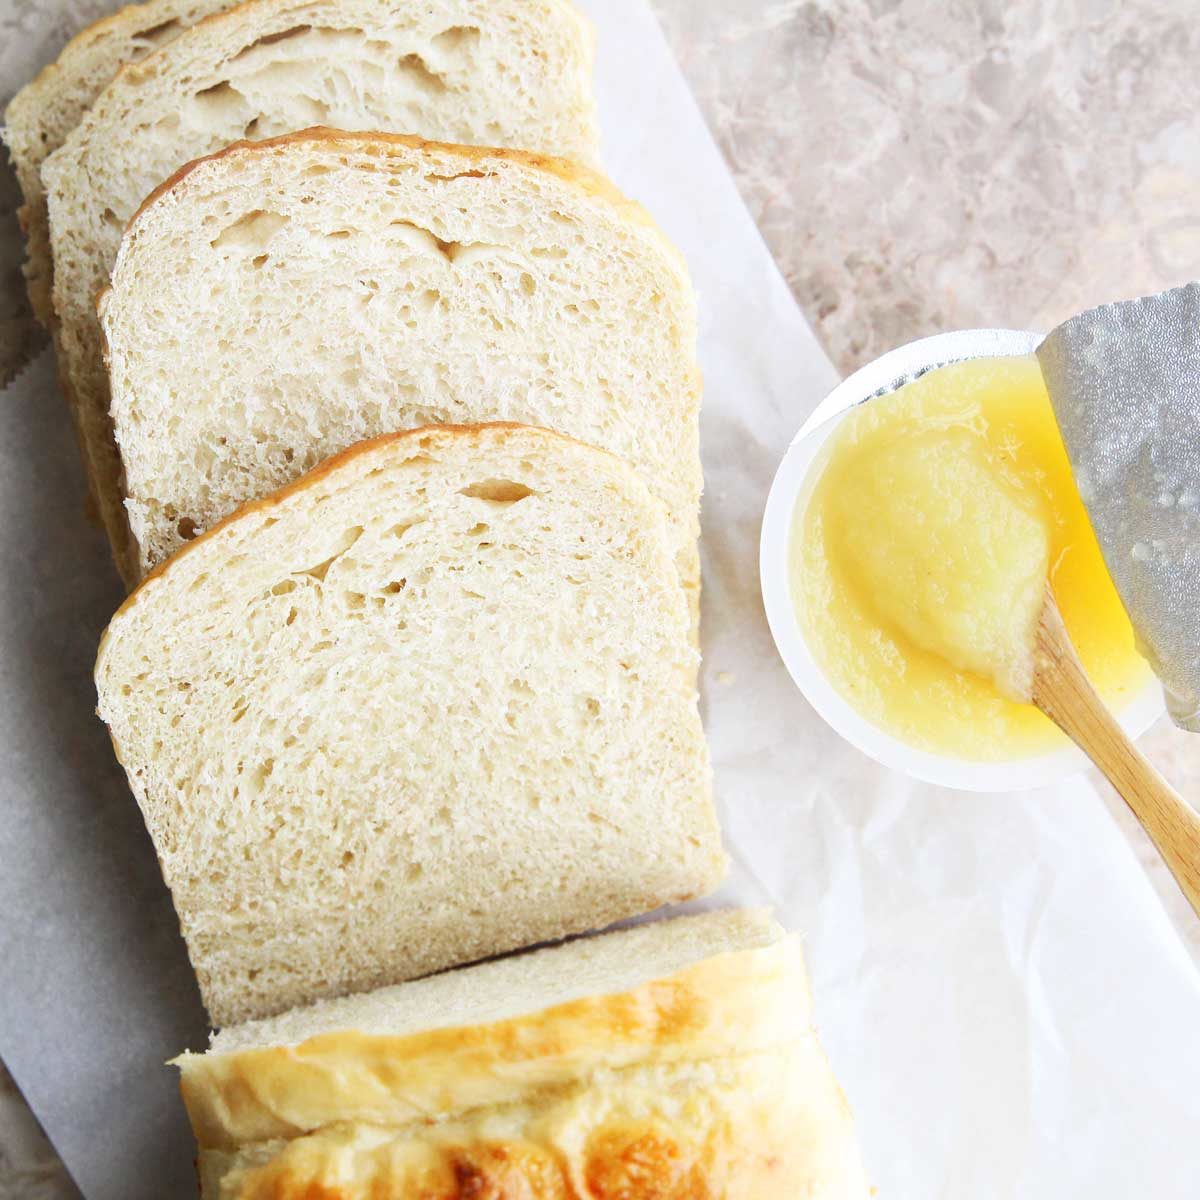 Applesauce Yeast Bread (A Healthier Recipe for White Bread)